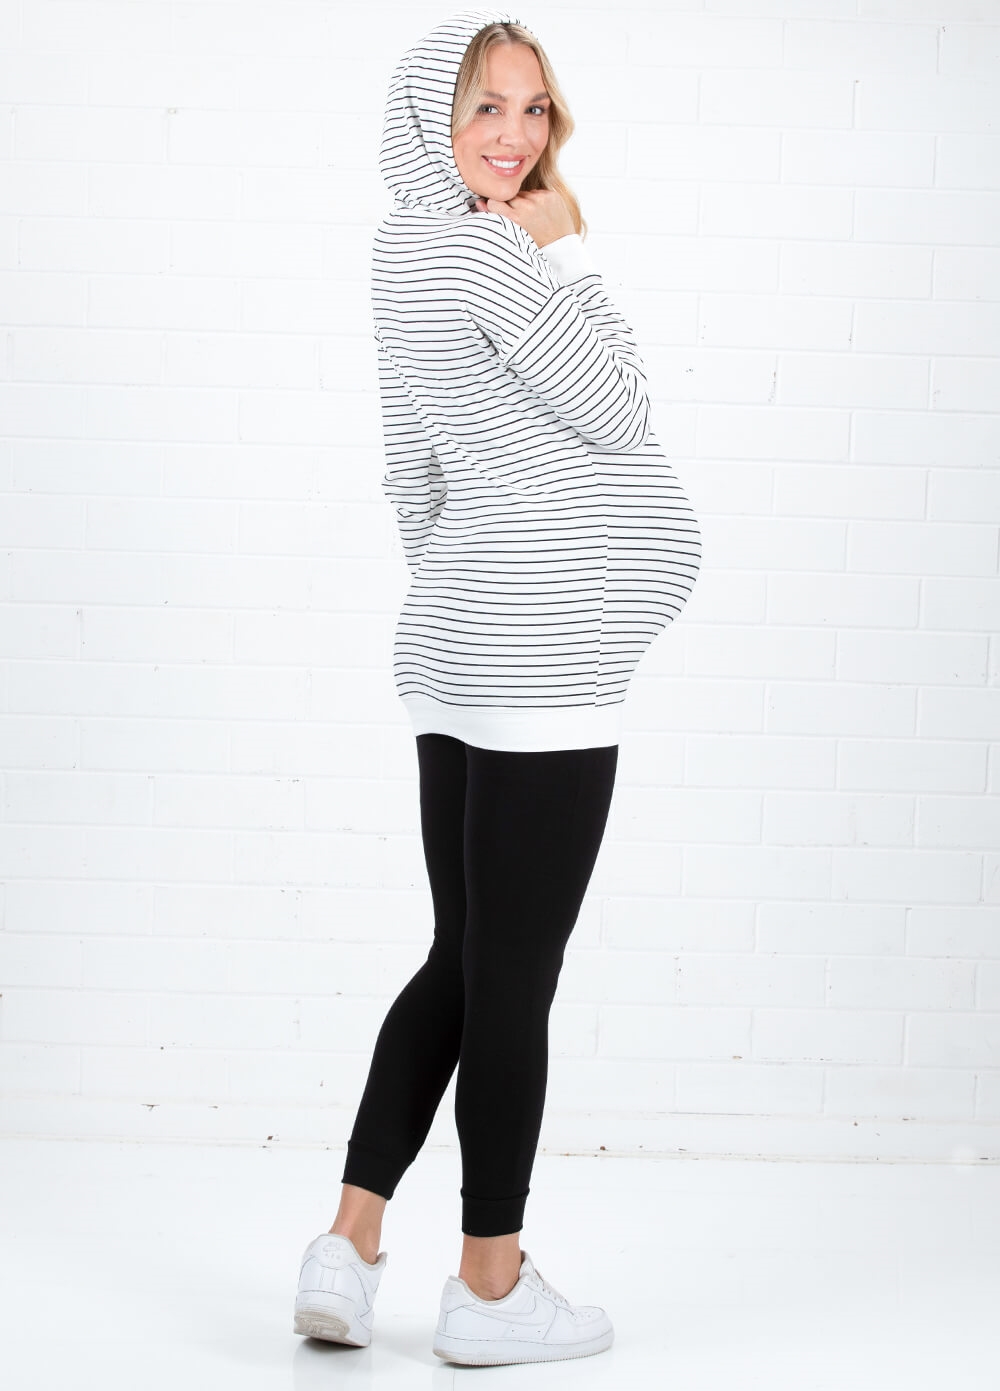 Martinique Pregnancy & Feeding Hoodie in Stripes by Lait & Co